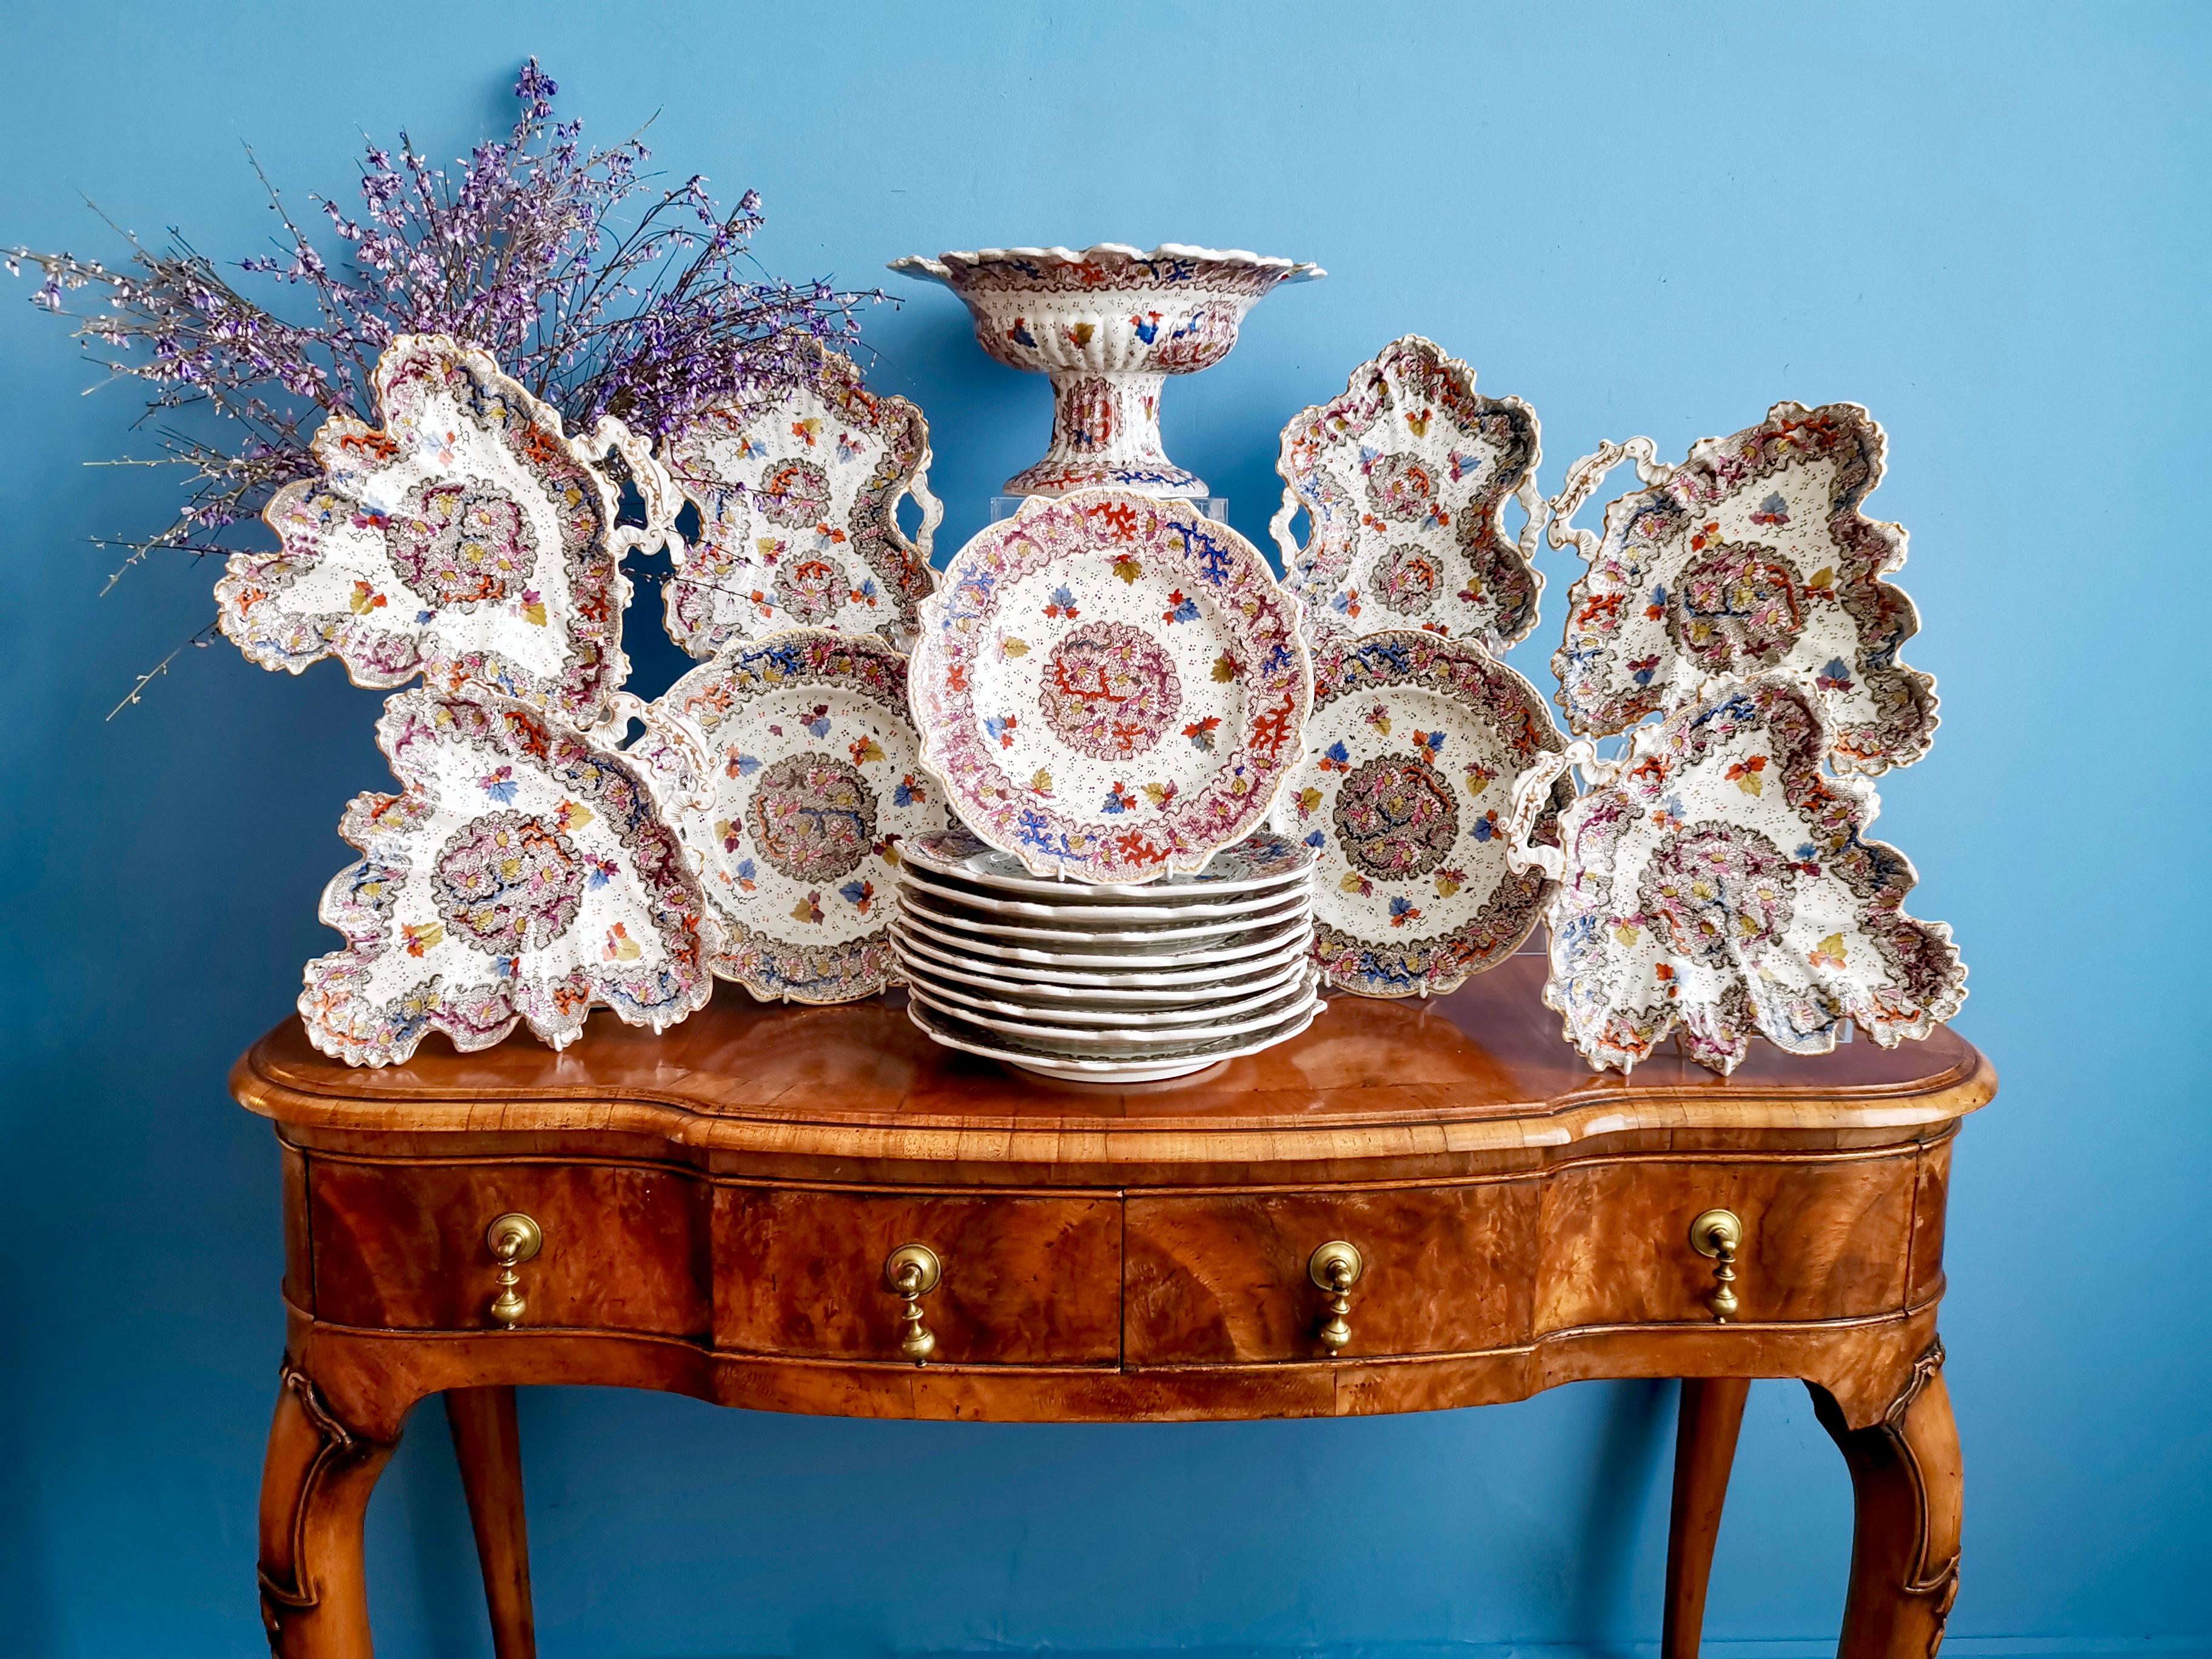 This is a wonderful dessert service made by Miles Mason between 1835 and 1840. It consists of a high footed comport, two rectangular leaf-shaped dishes, four triangular leaf-shaped dishes, and twelve plates.

Miles Mason started making porcelain